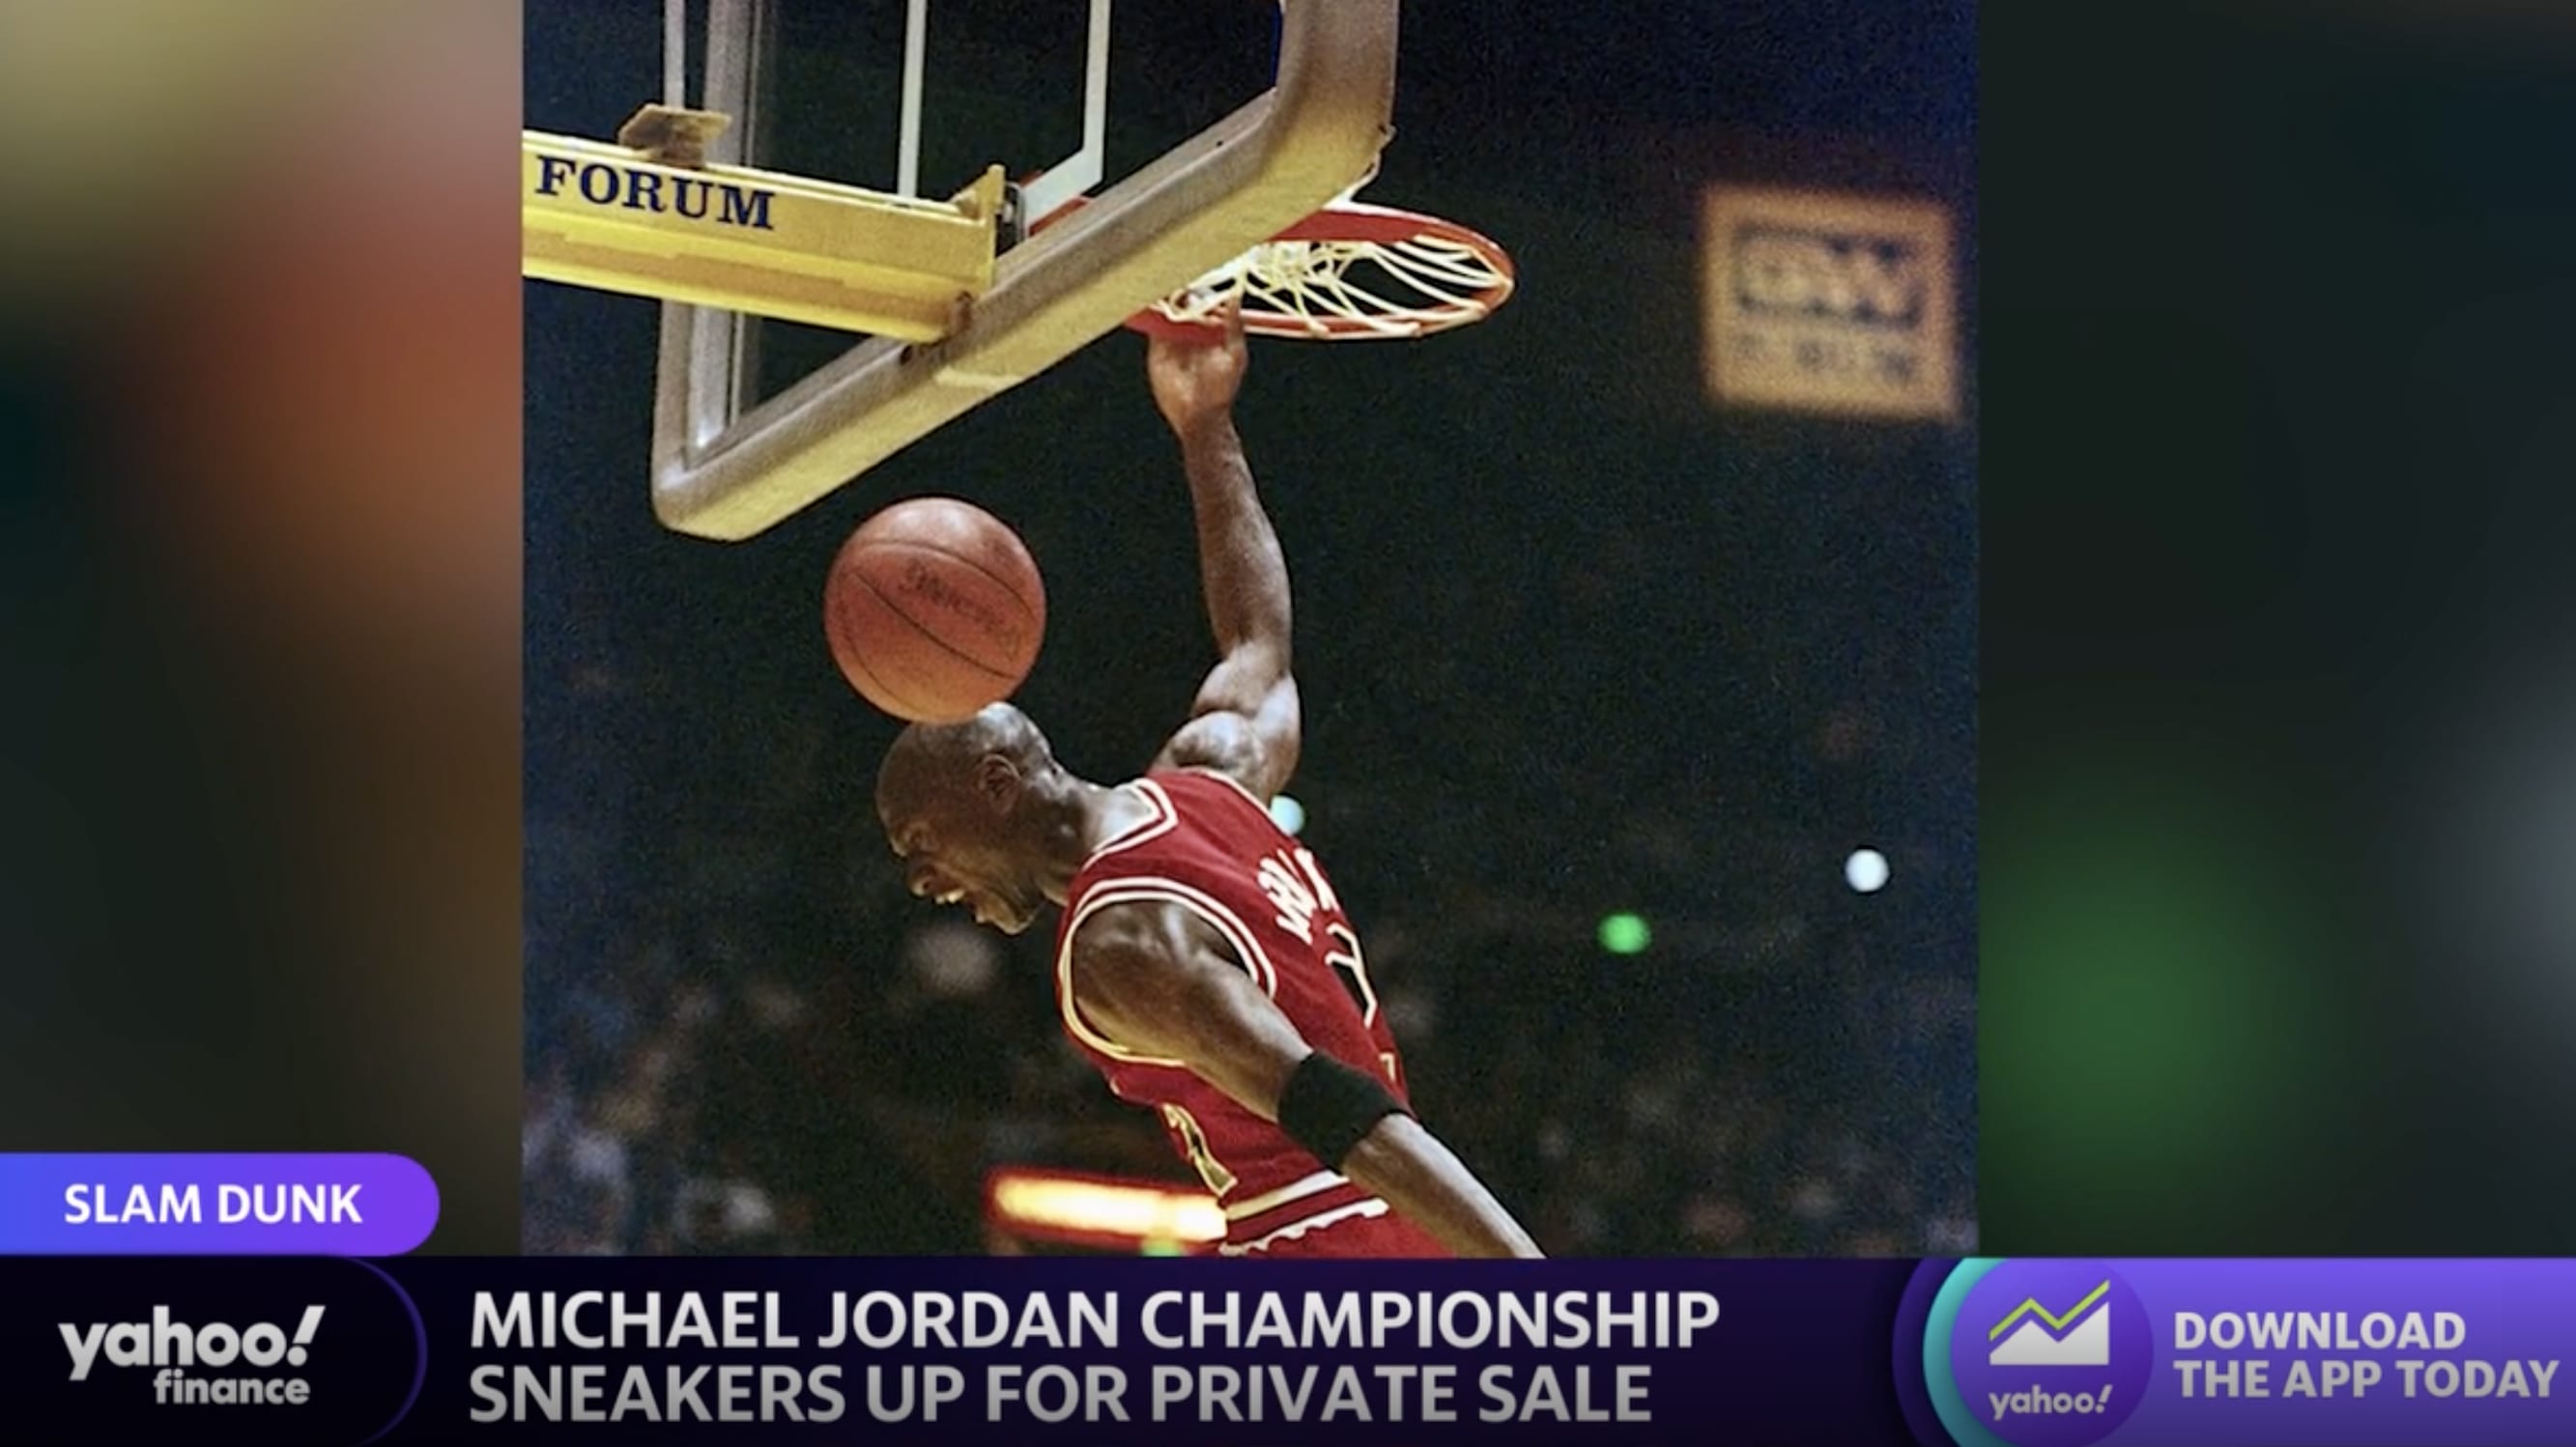 The 'holy grail' of sneakers: Michael Jordan's NBA Finals trainers